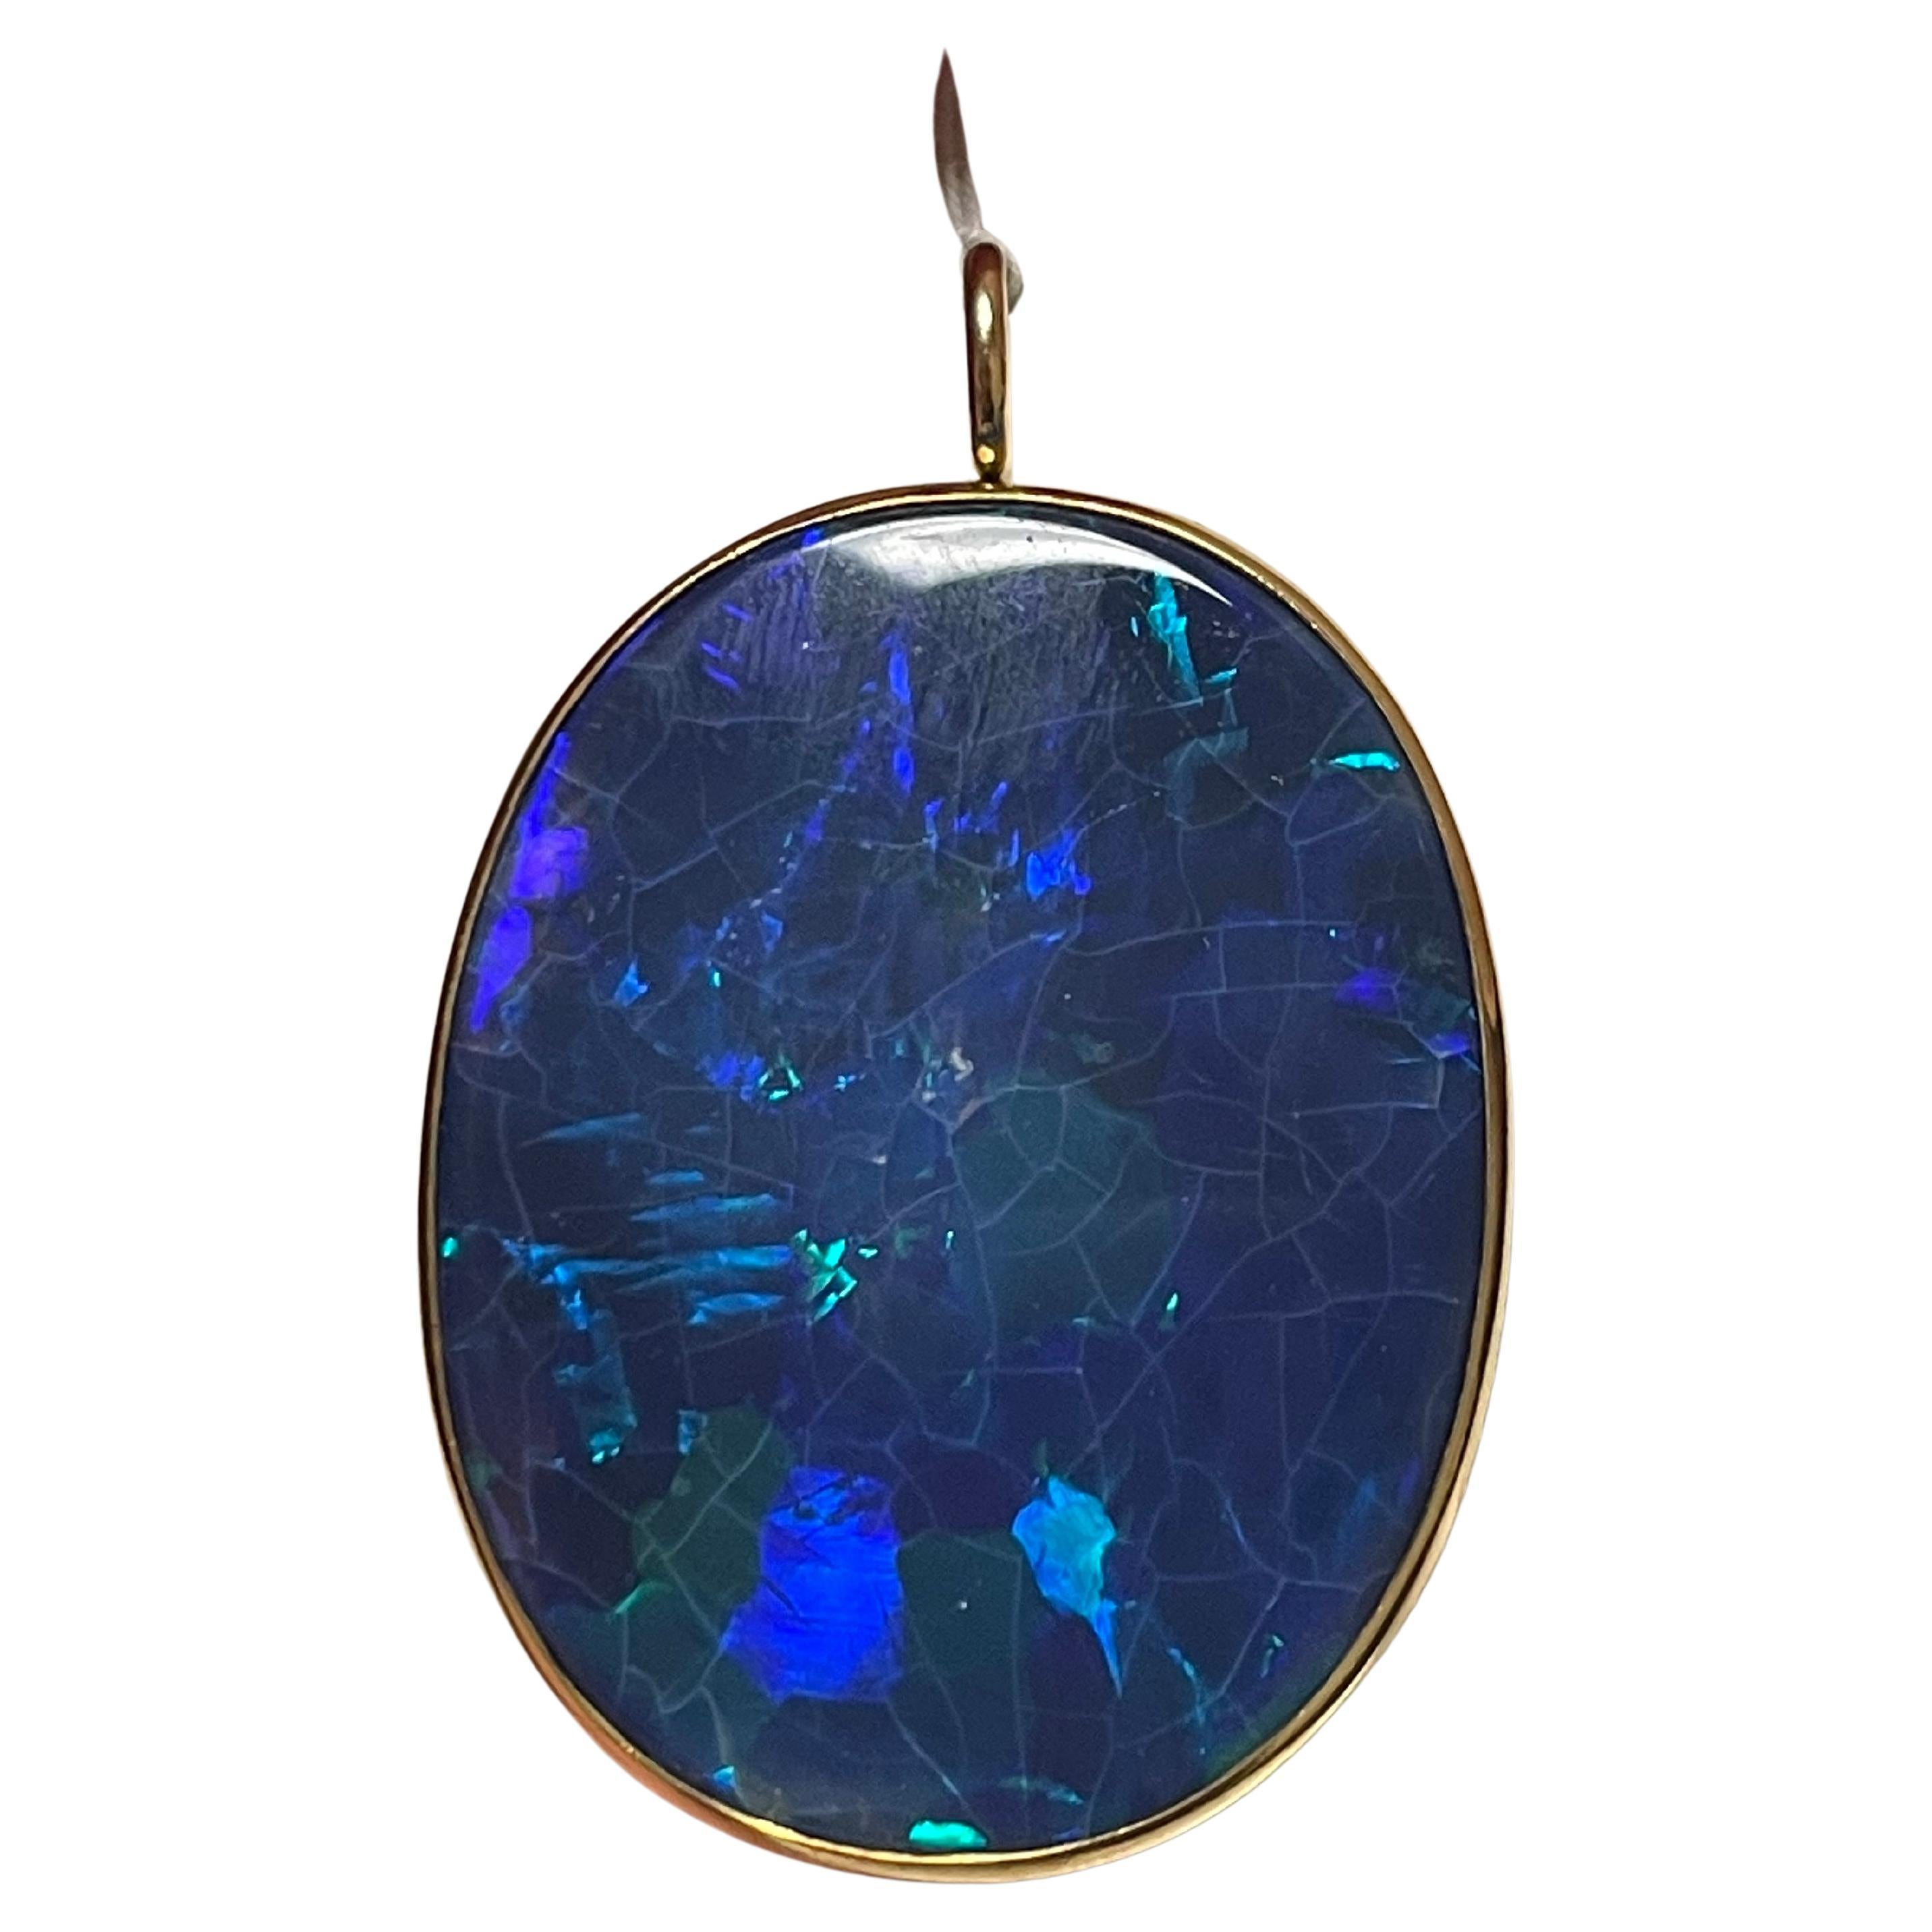 One Lady's Marcus & CO Black Opal Pendant, 18k Yellow Gold  For Sale